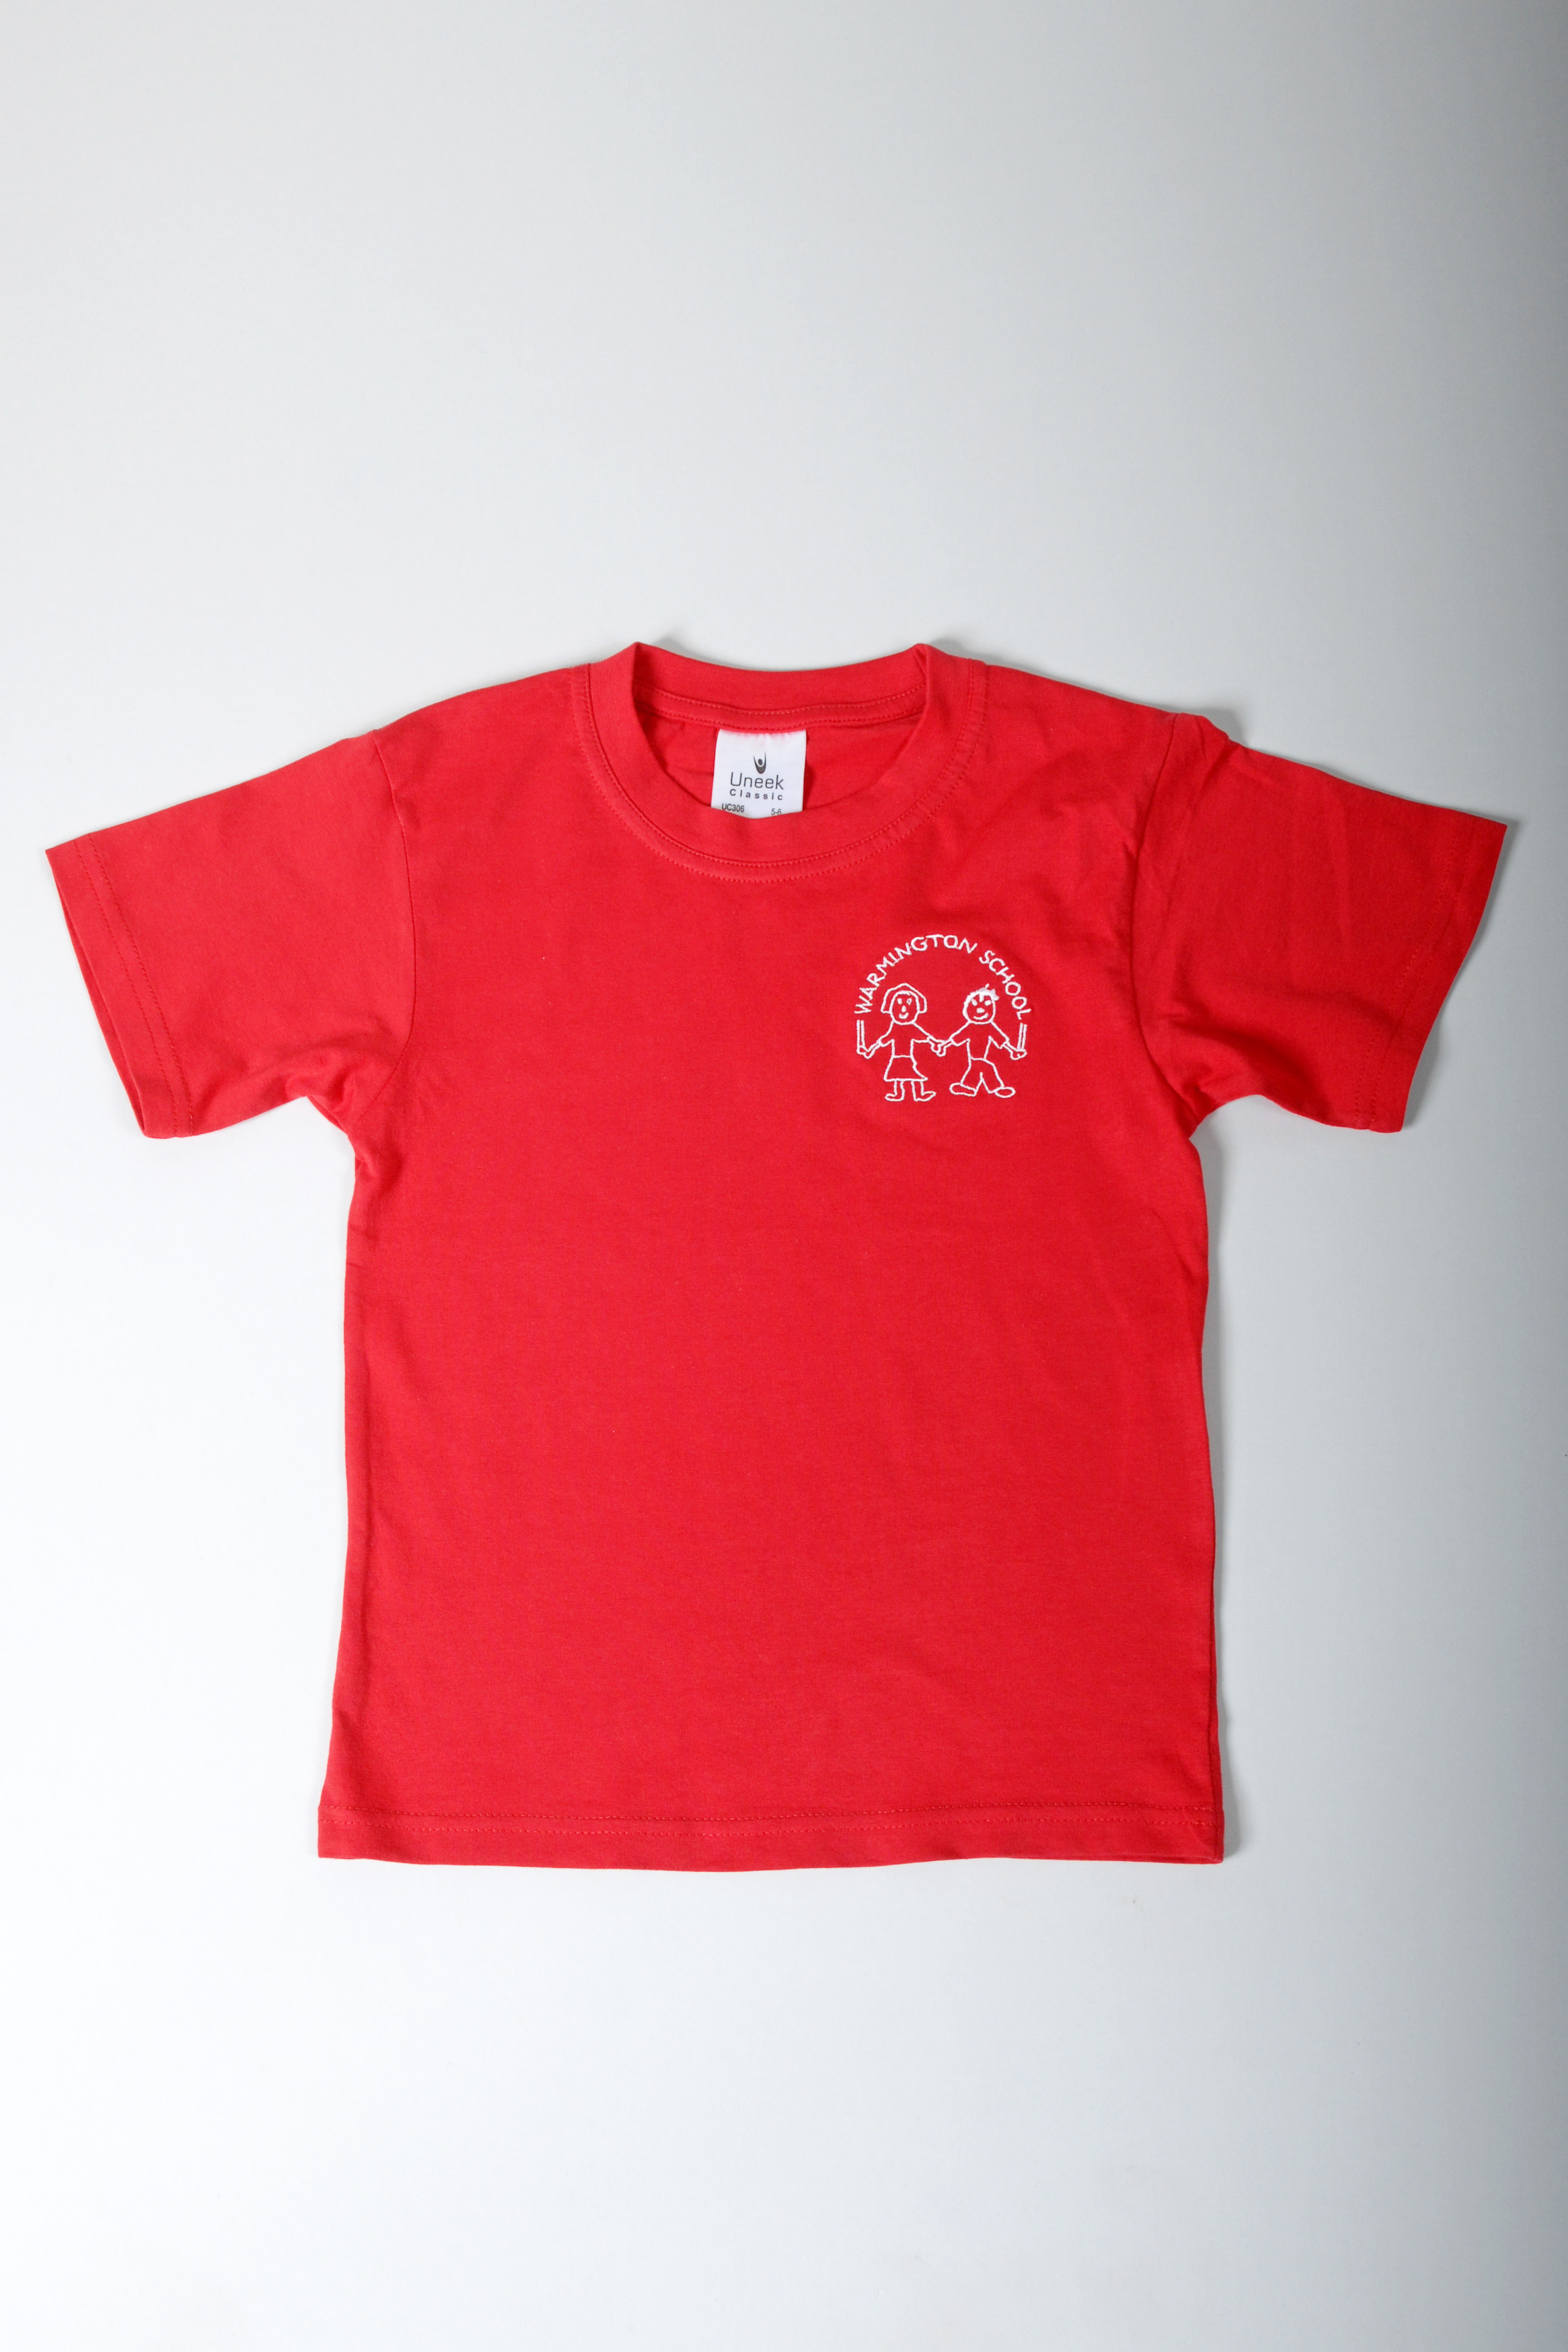 Red T Shirt with School Logo - Age 2-3